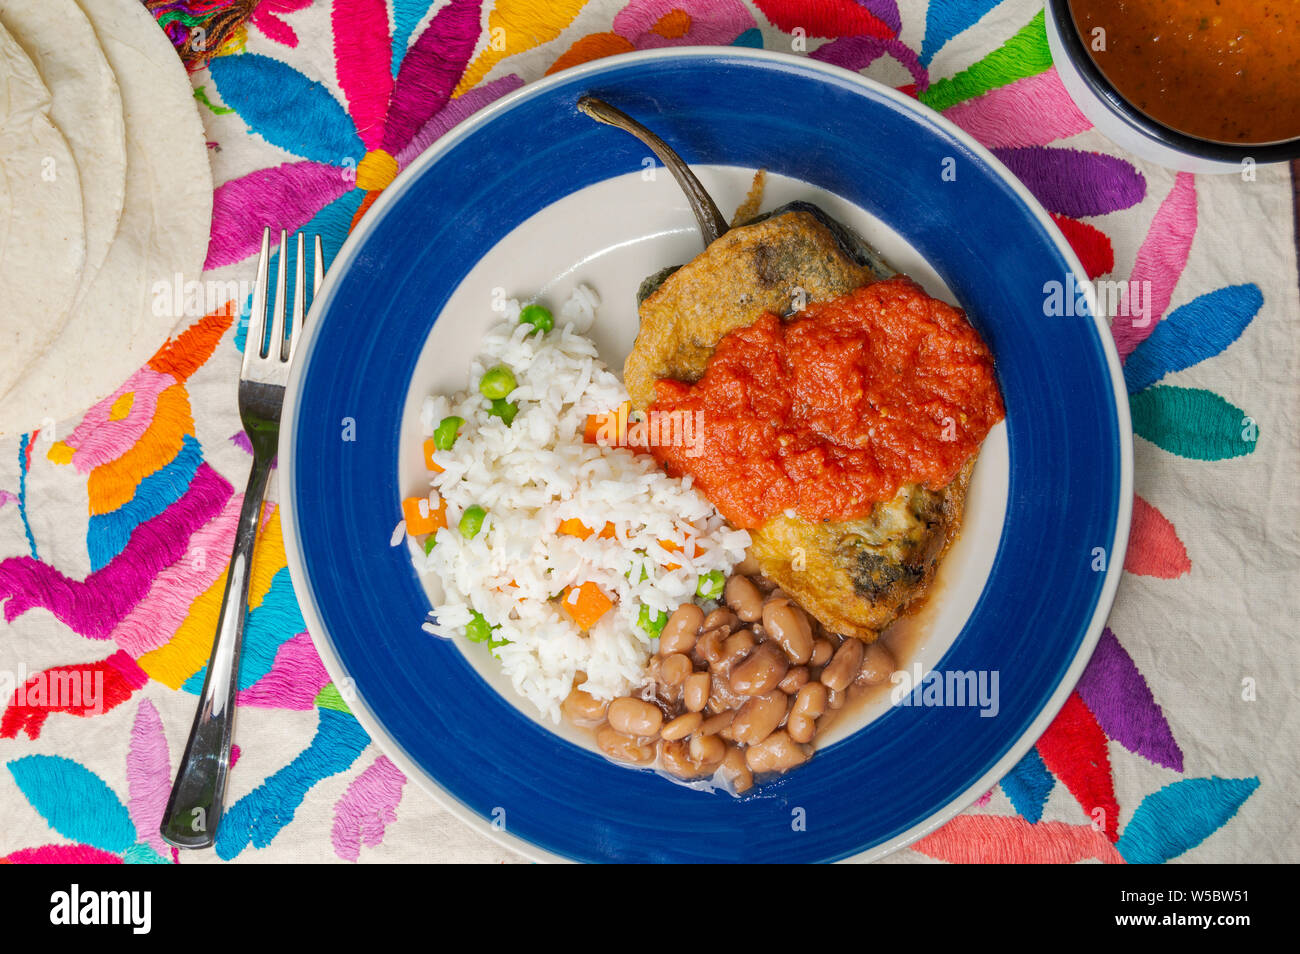 Mexican stuffed chilies (Chiles Rellenos), poblano chilies filled with cheese and coated with a light batter. Served with beans, rice and red tomato s Stock Photo